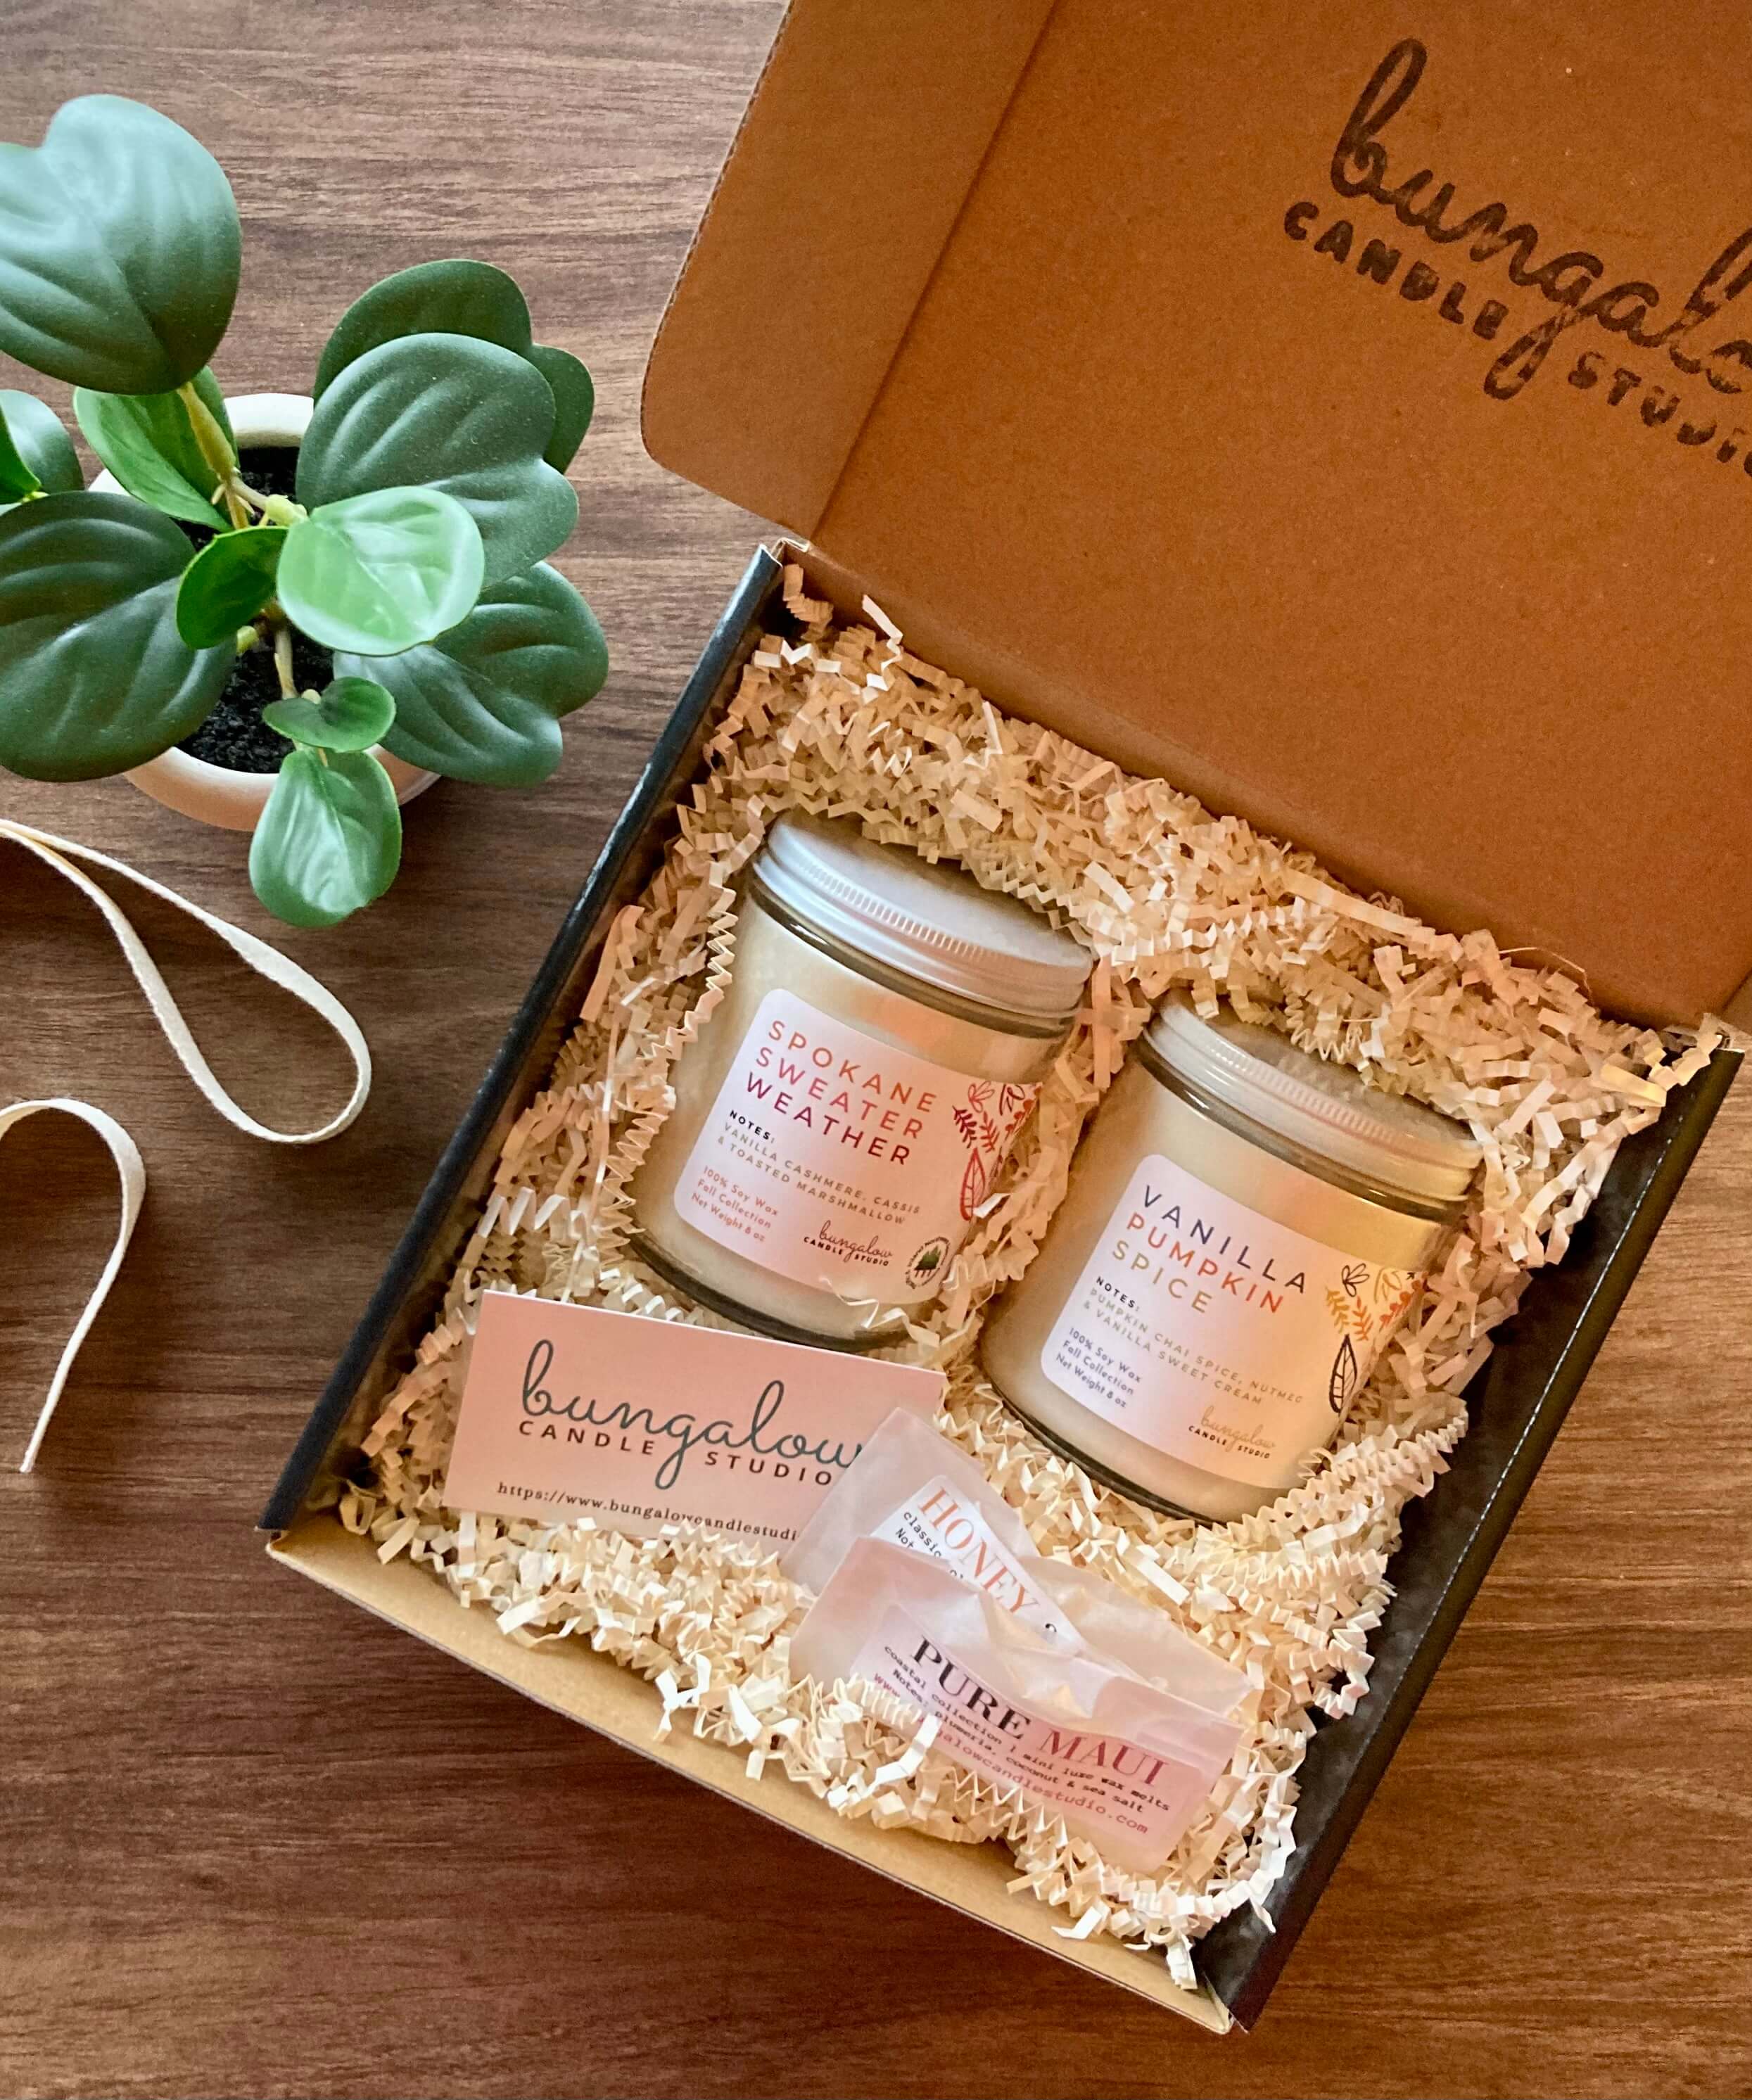 Scented Candle Gift Box